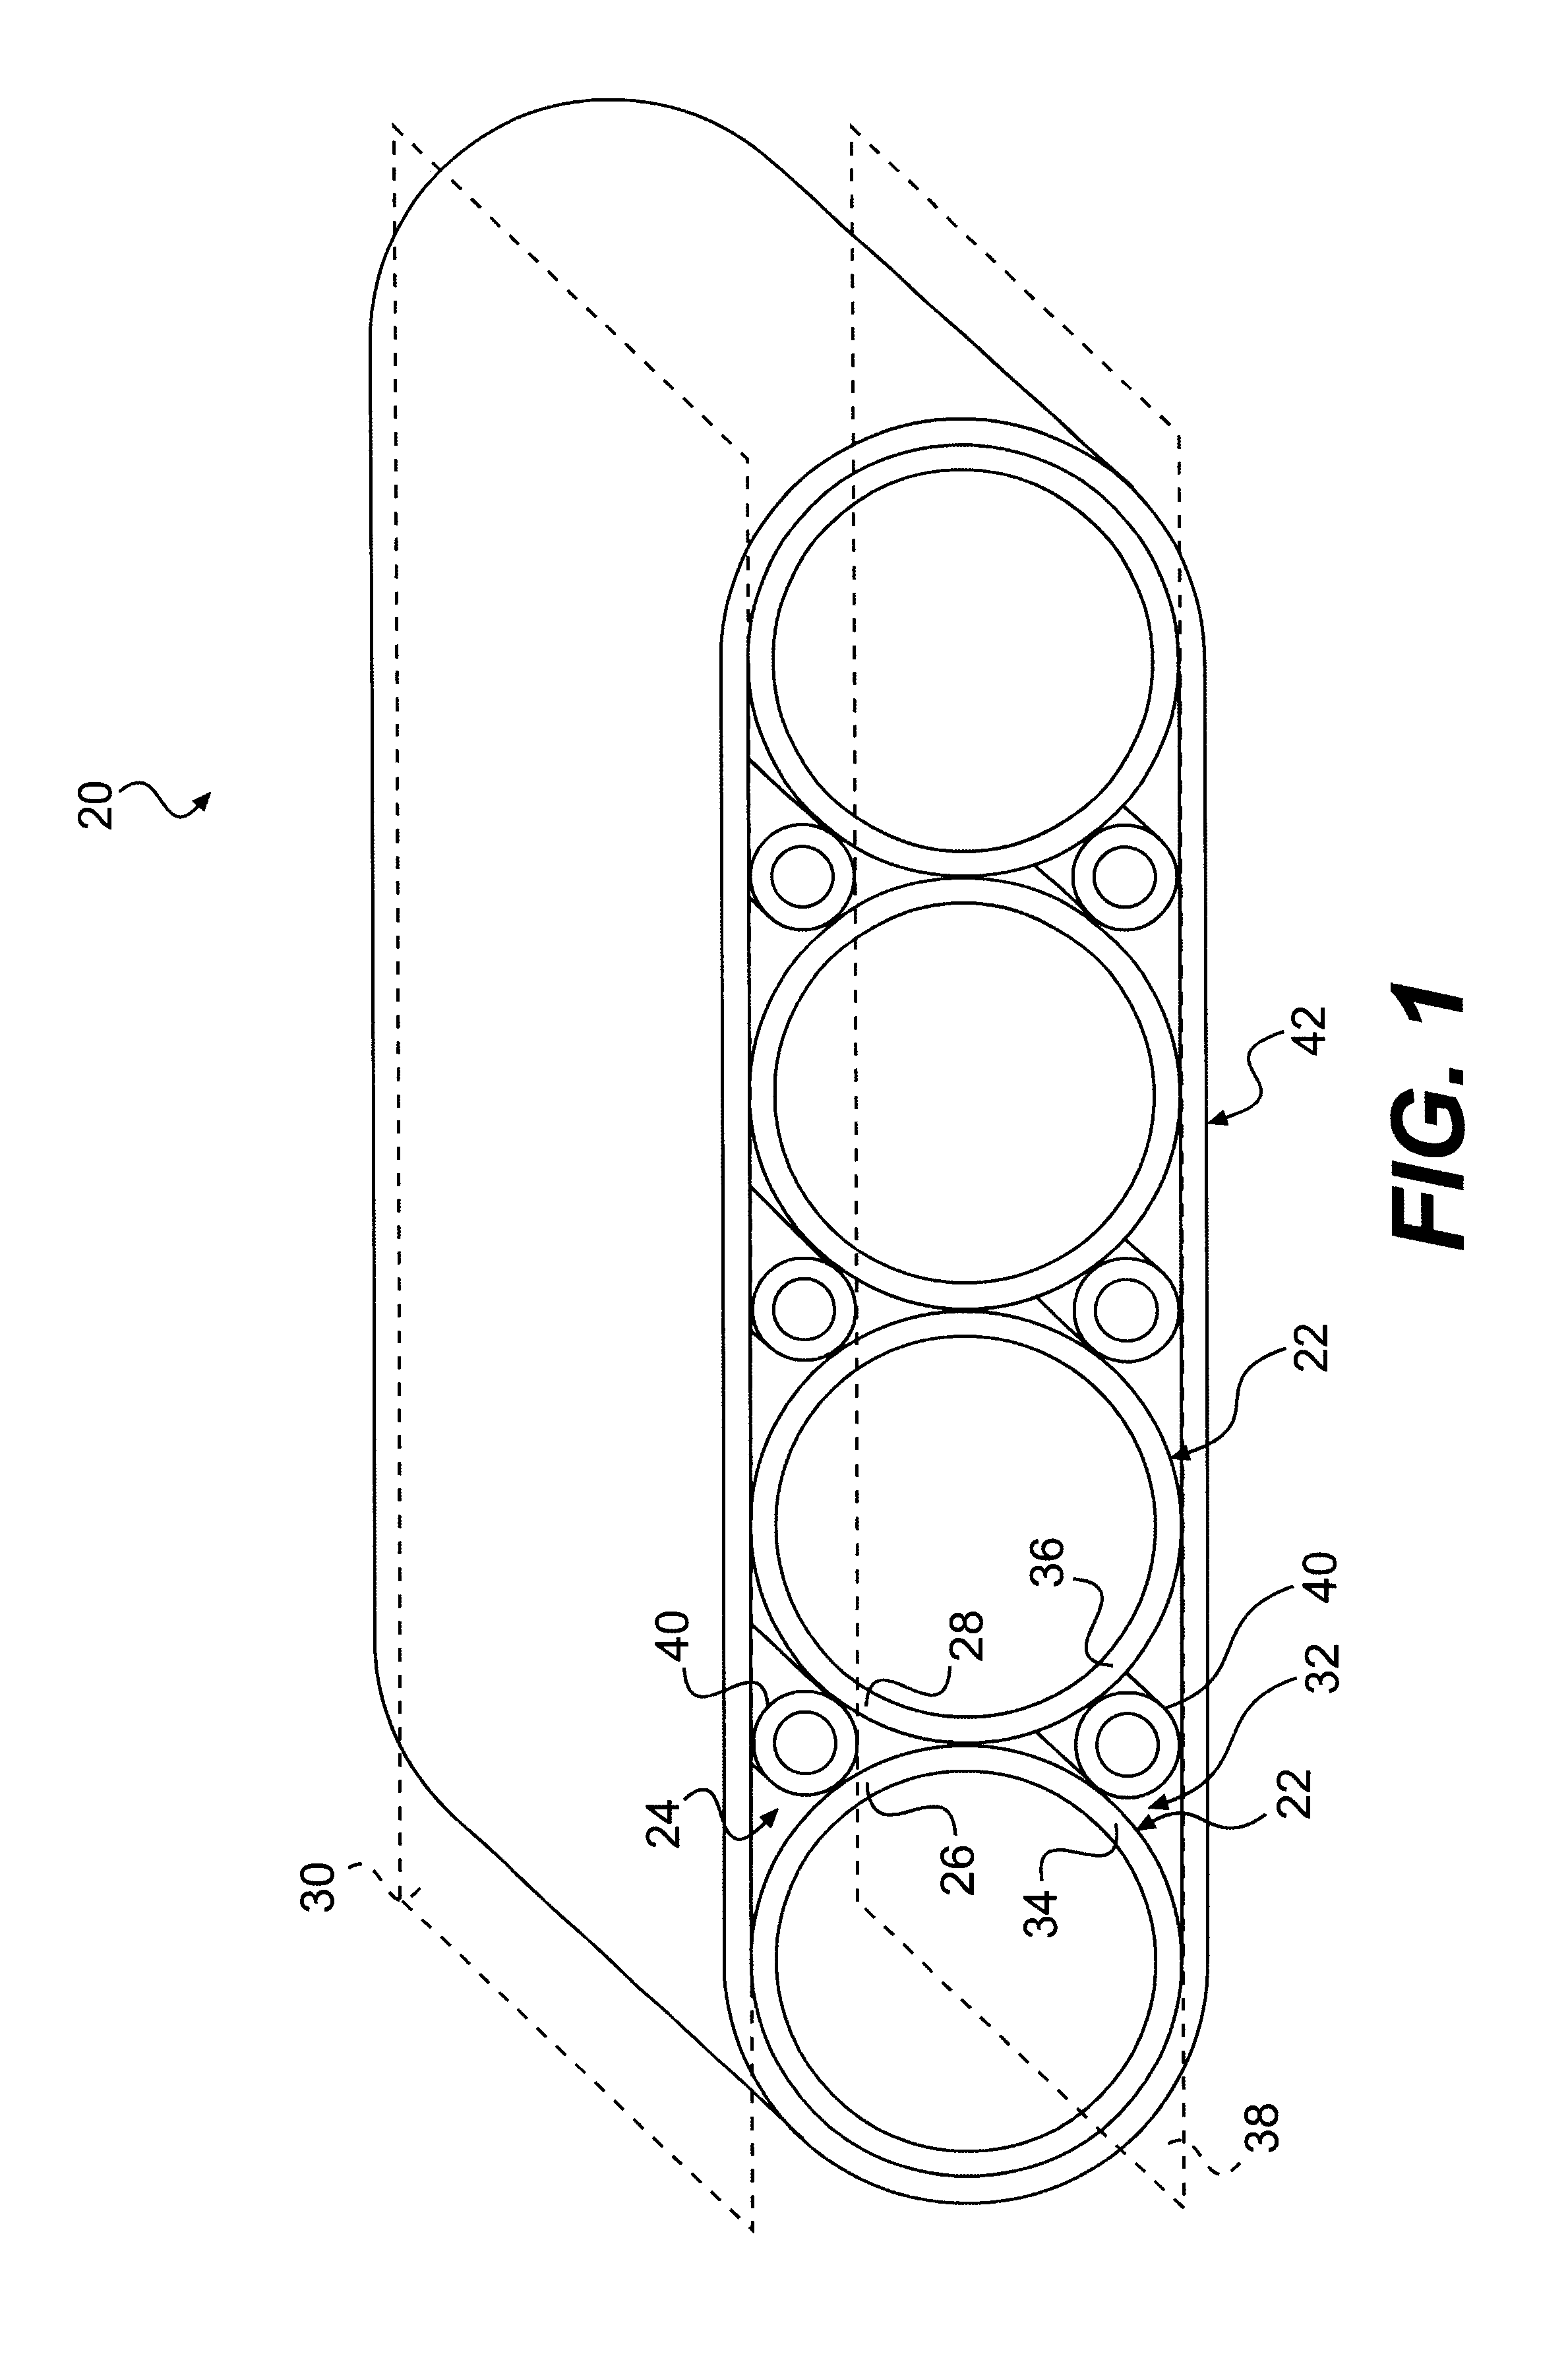 Pipe assembly for collecting surface water runoff and associated methods